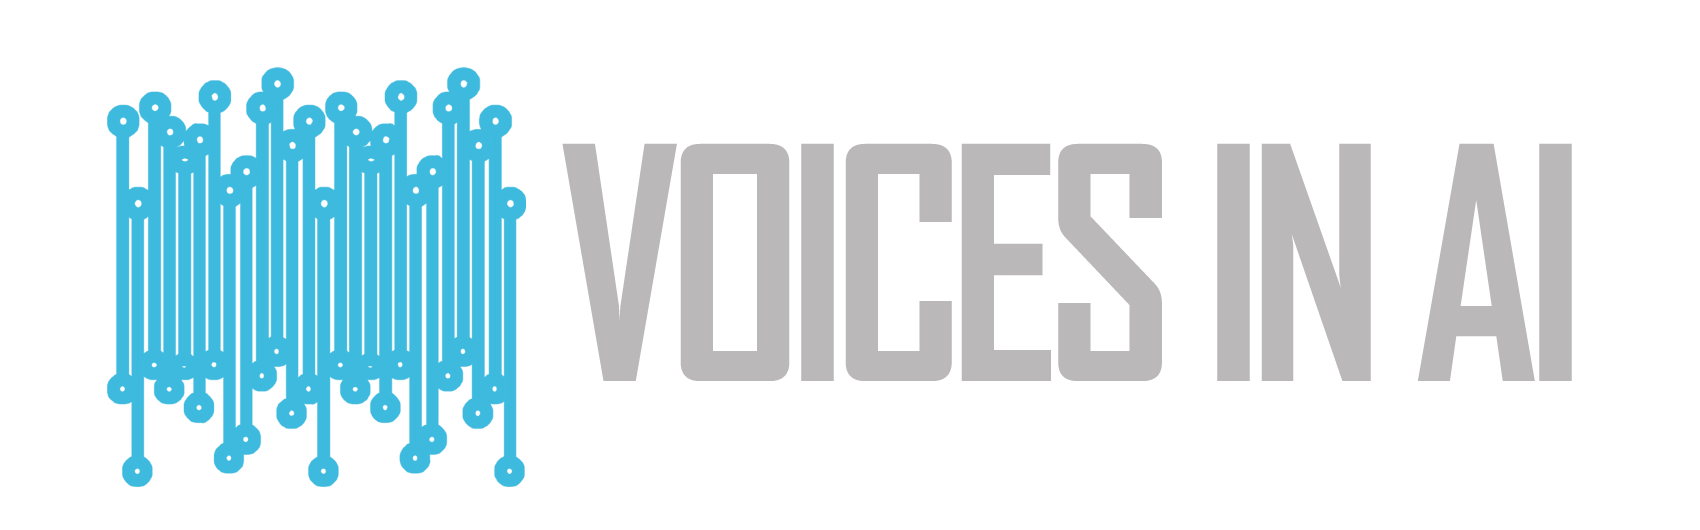 Voices in AI